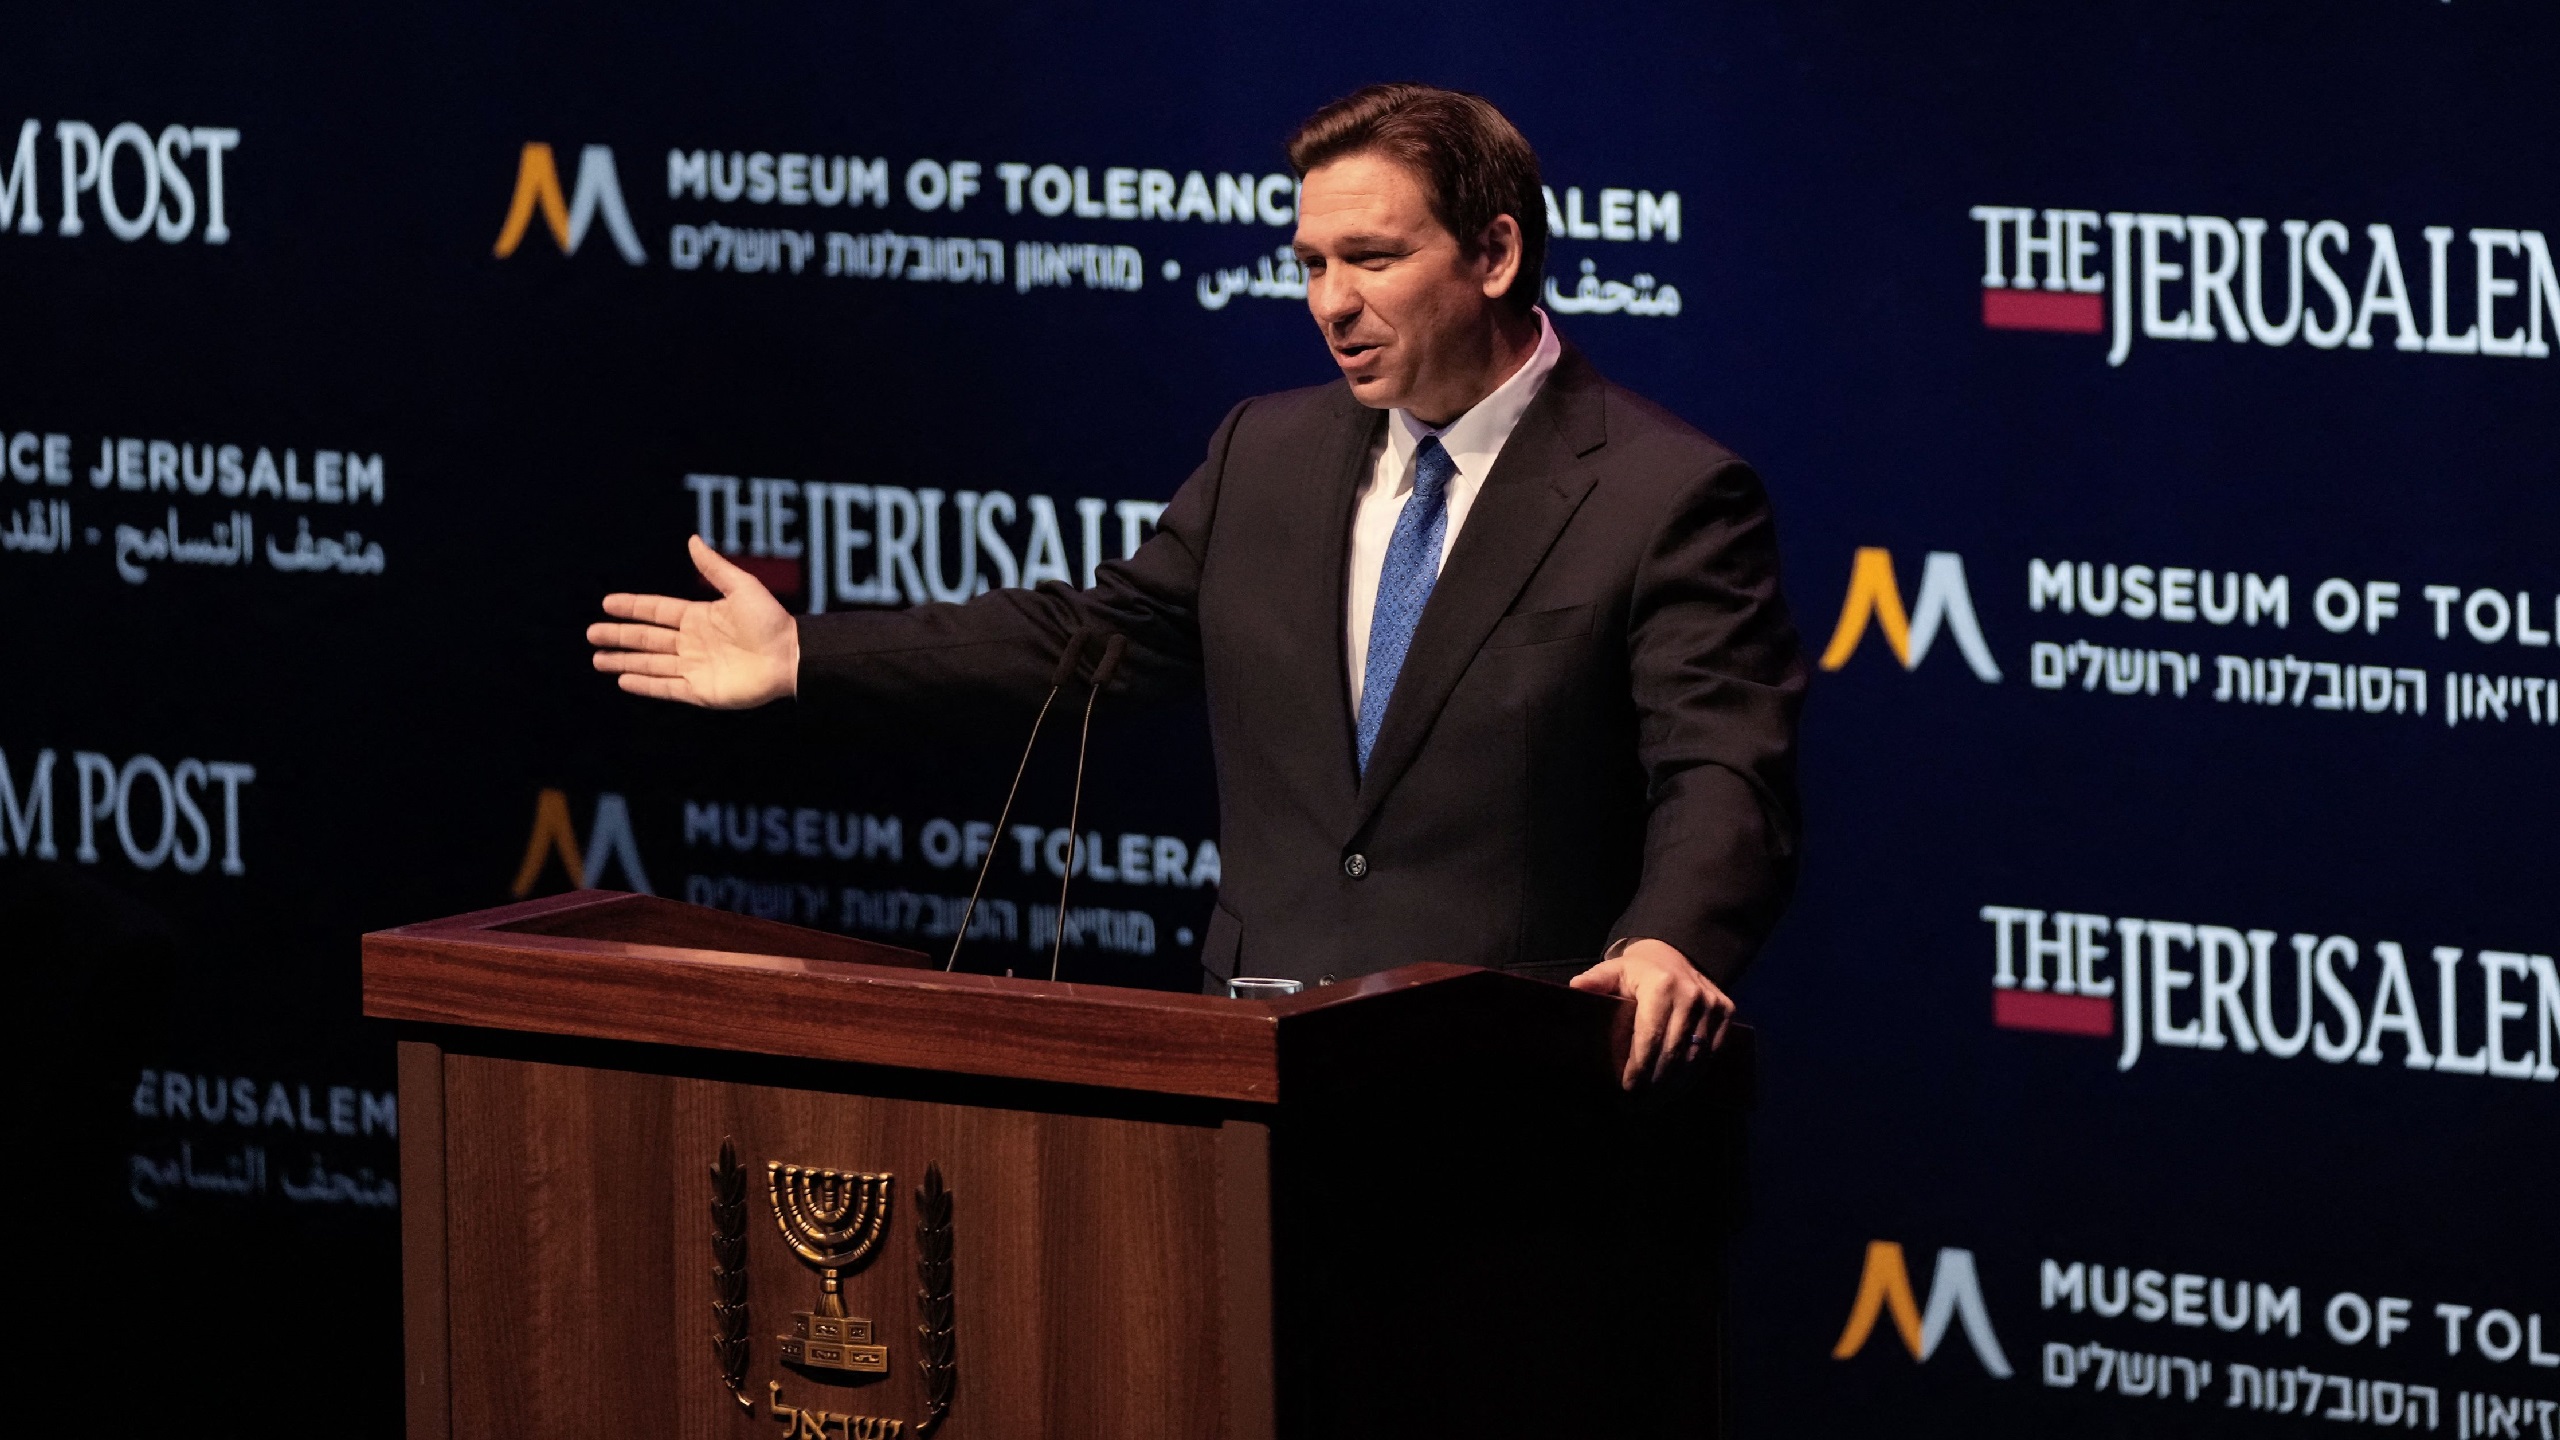 Florida Governor Signs Law To Combat Antisemitism, Calls West Bank Disputed, Not Occupied, at Jerusalem Conference